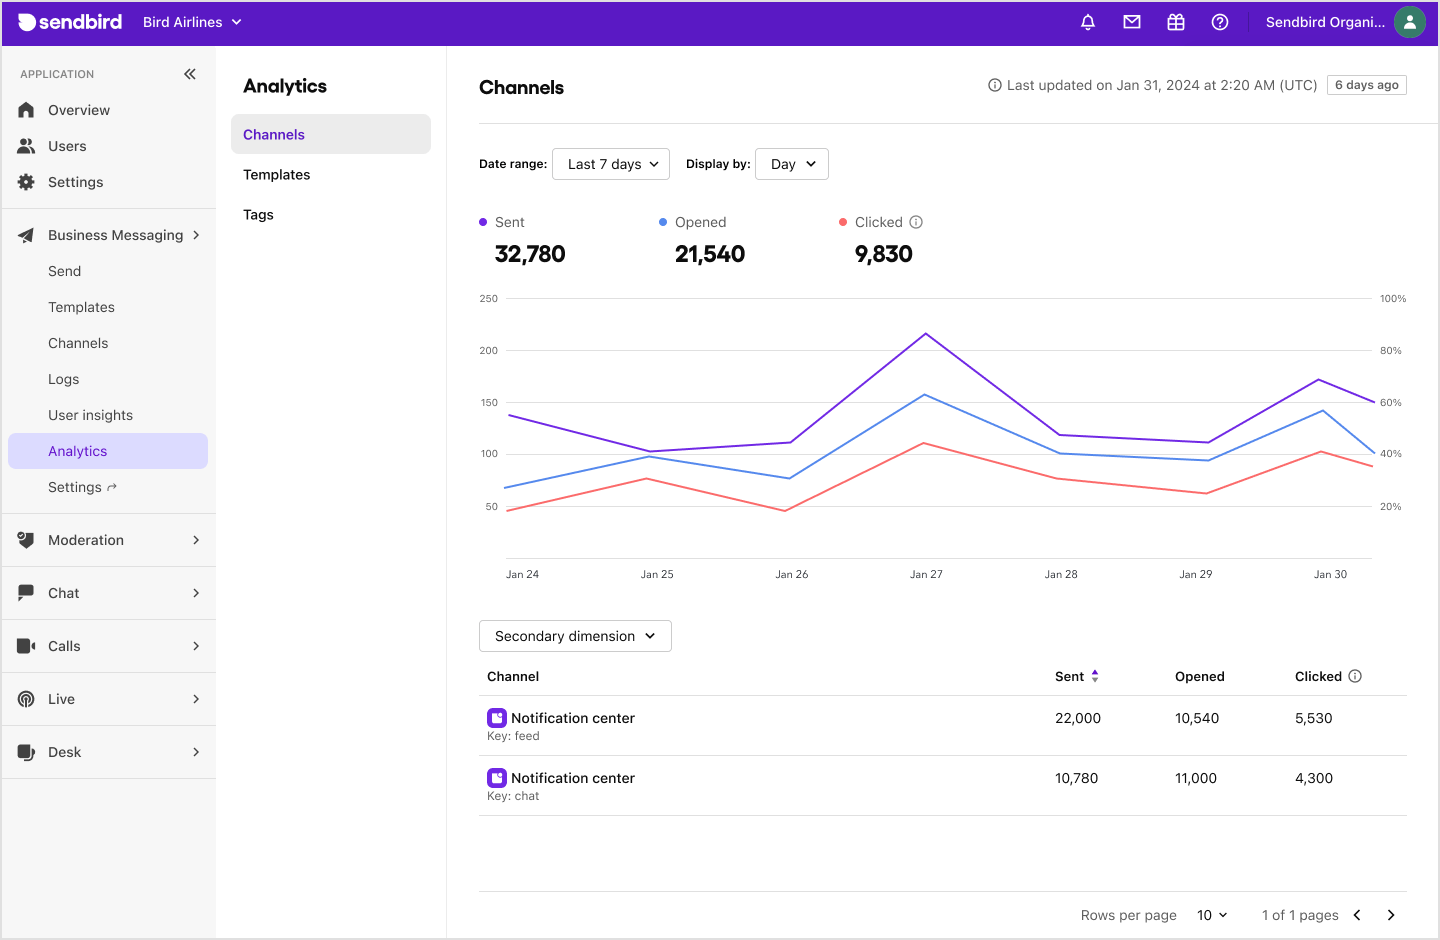 image|The Channels tab for the Analytics page on Sendbird Dashboard